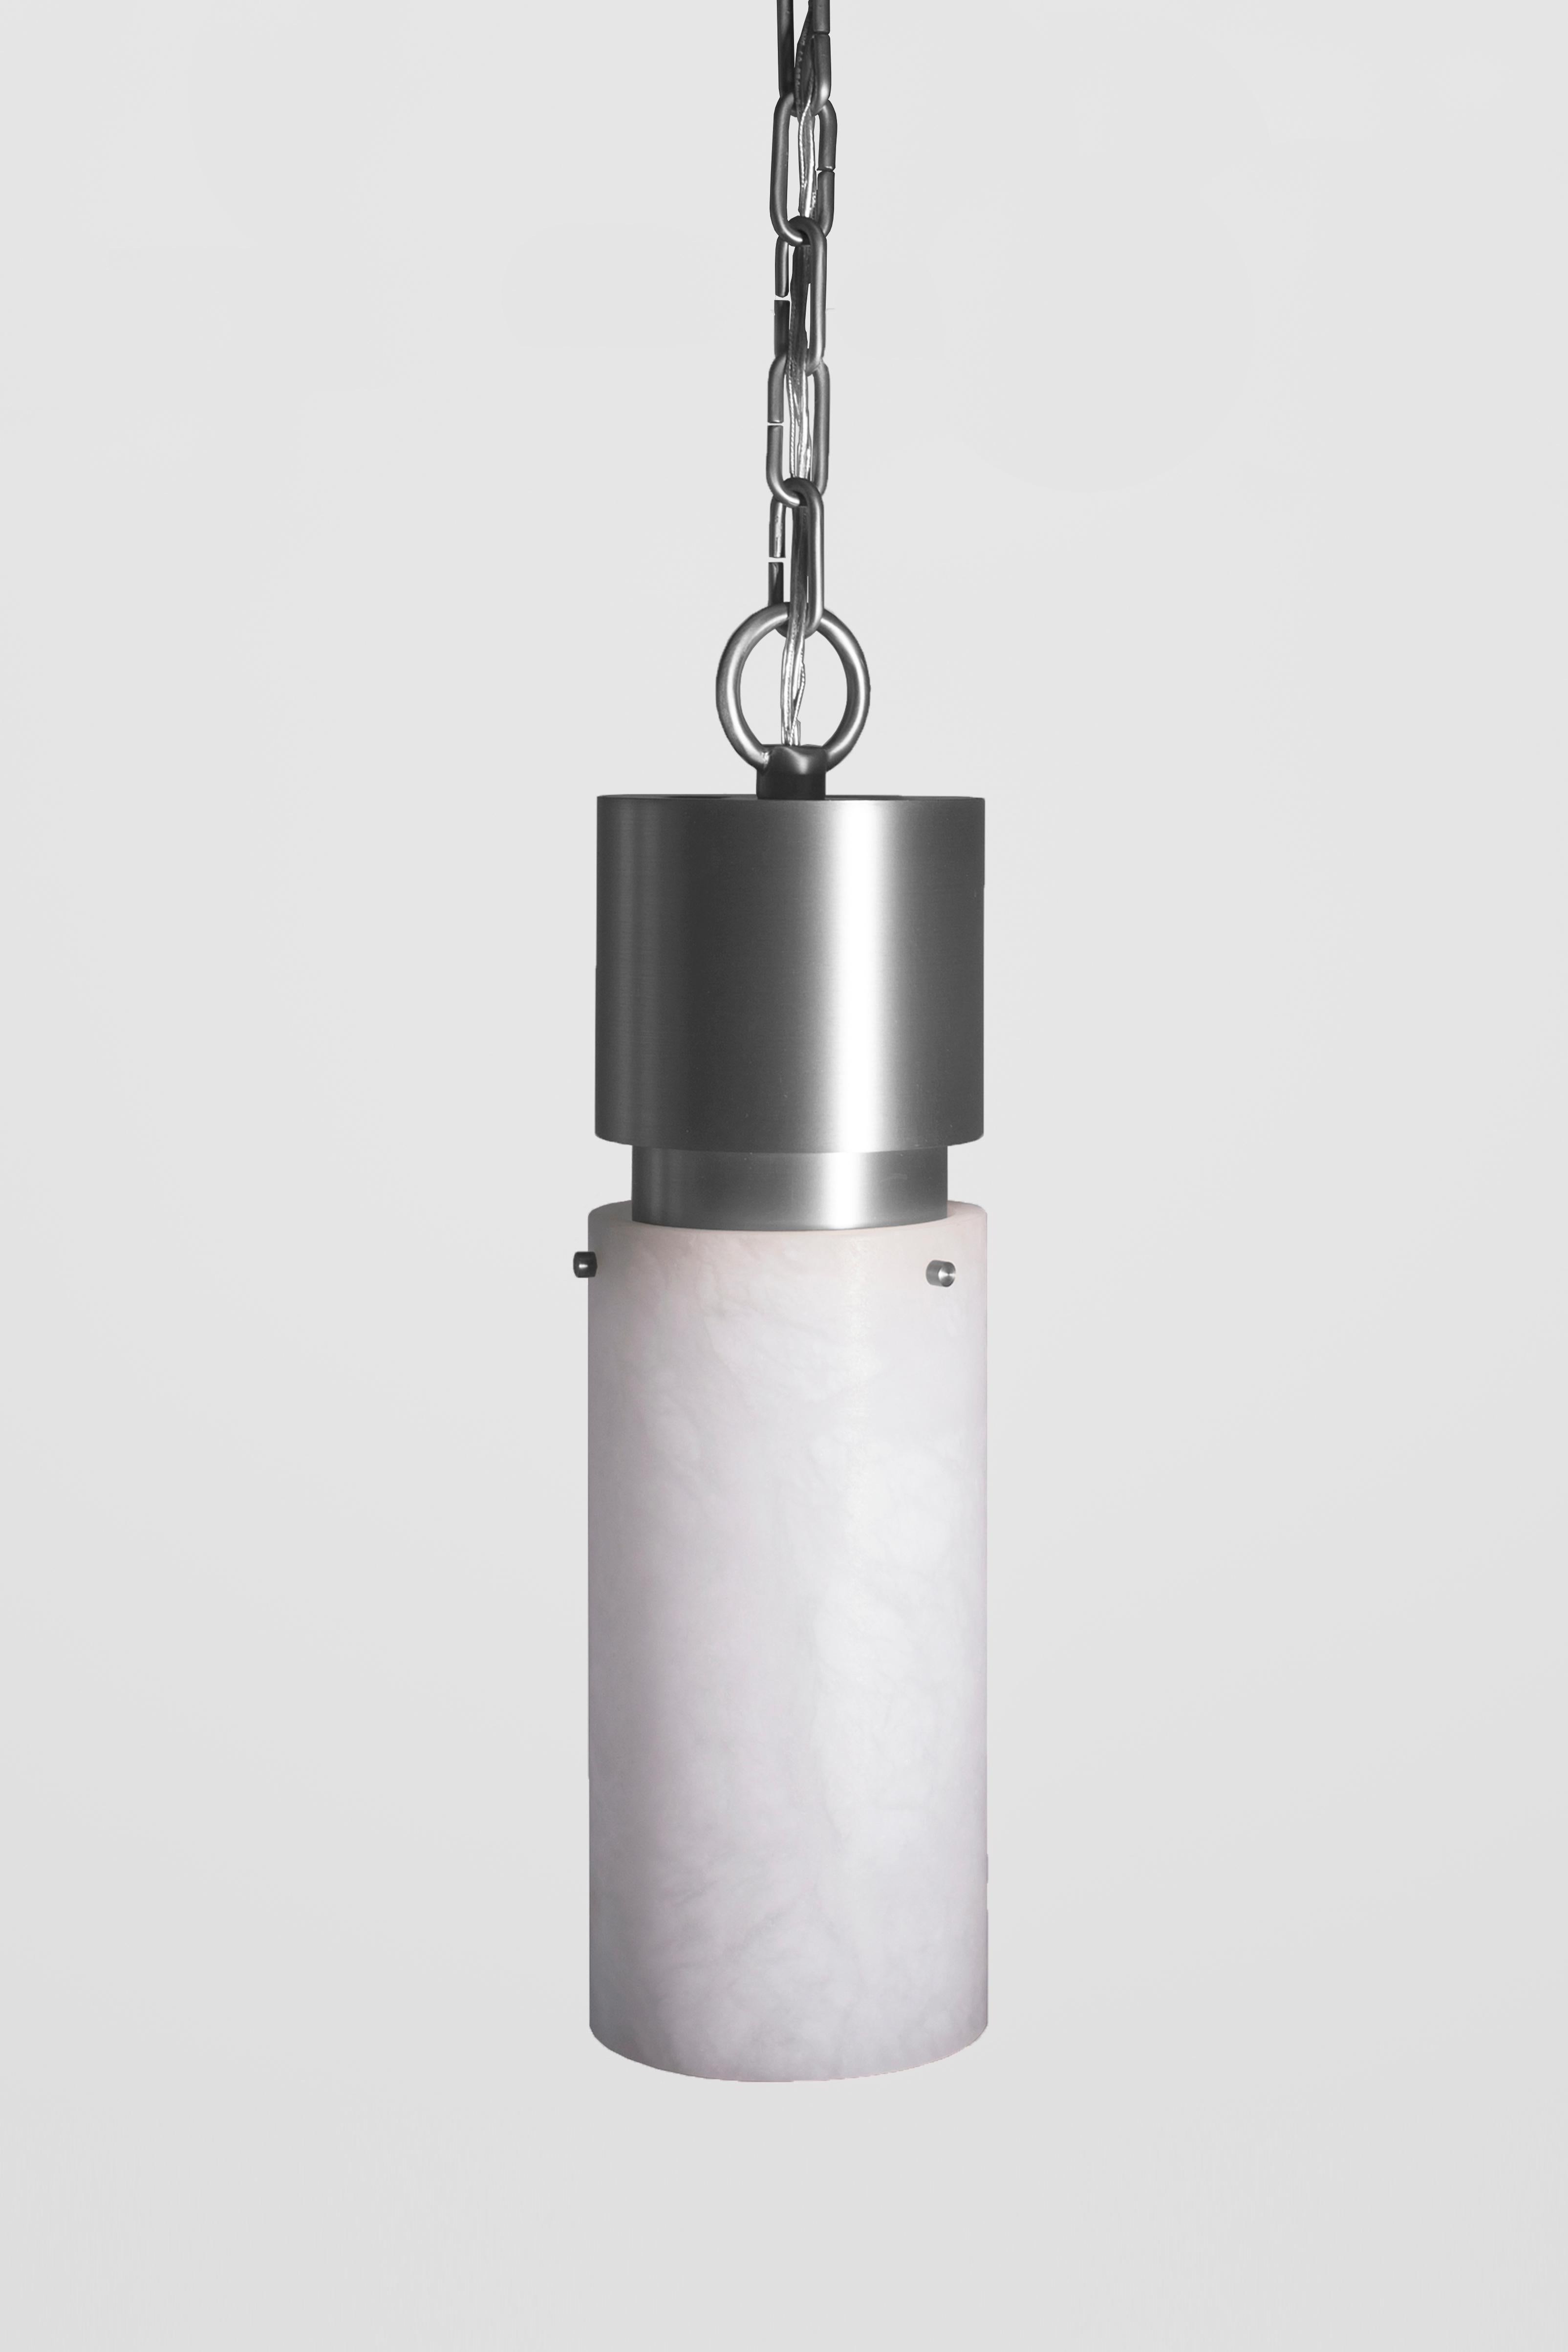 Orphan Work 000 Pendant
Shown in brushed nickel and alabaster
Available in brushed brass, brushed nickel and blackened brass
Measures: 15 1/4” height x 5 3/8” diameter
Includes 3' of chain
UL approved
Holds (1) 60w candelabra bulb
must use LED